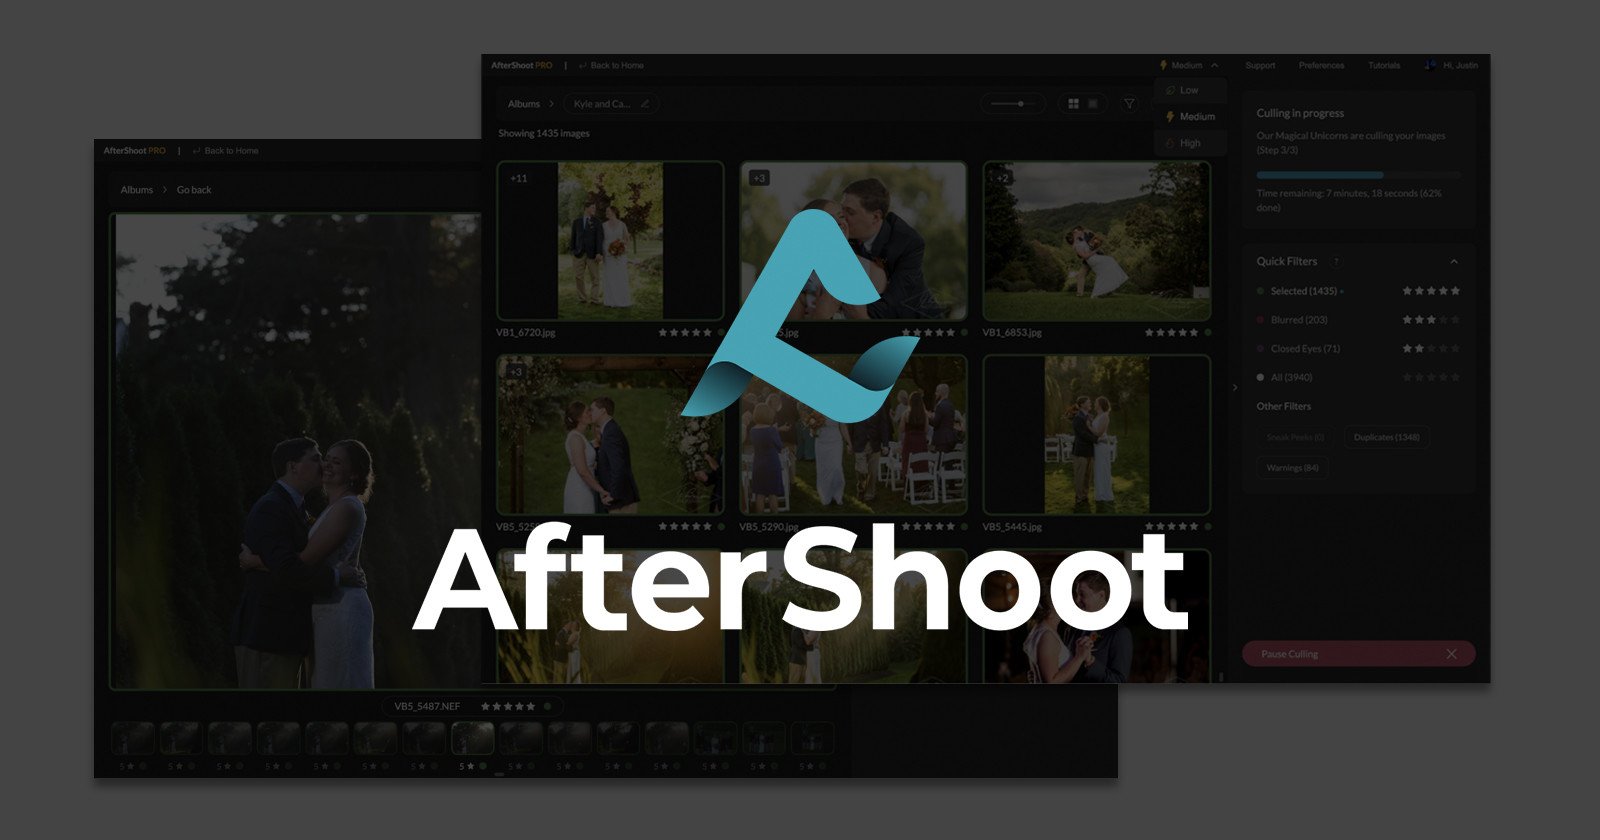  culling software aftershoot gets significant feature update 